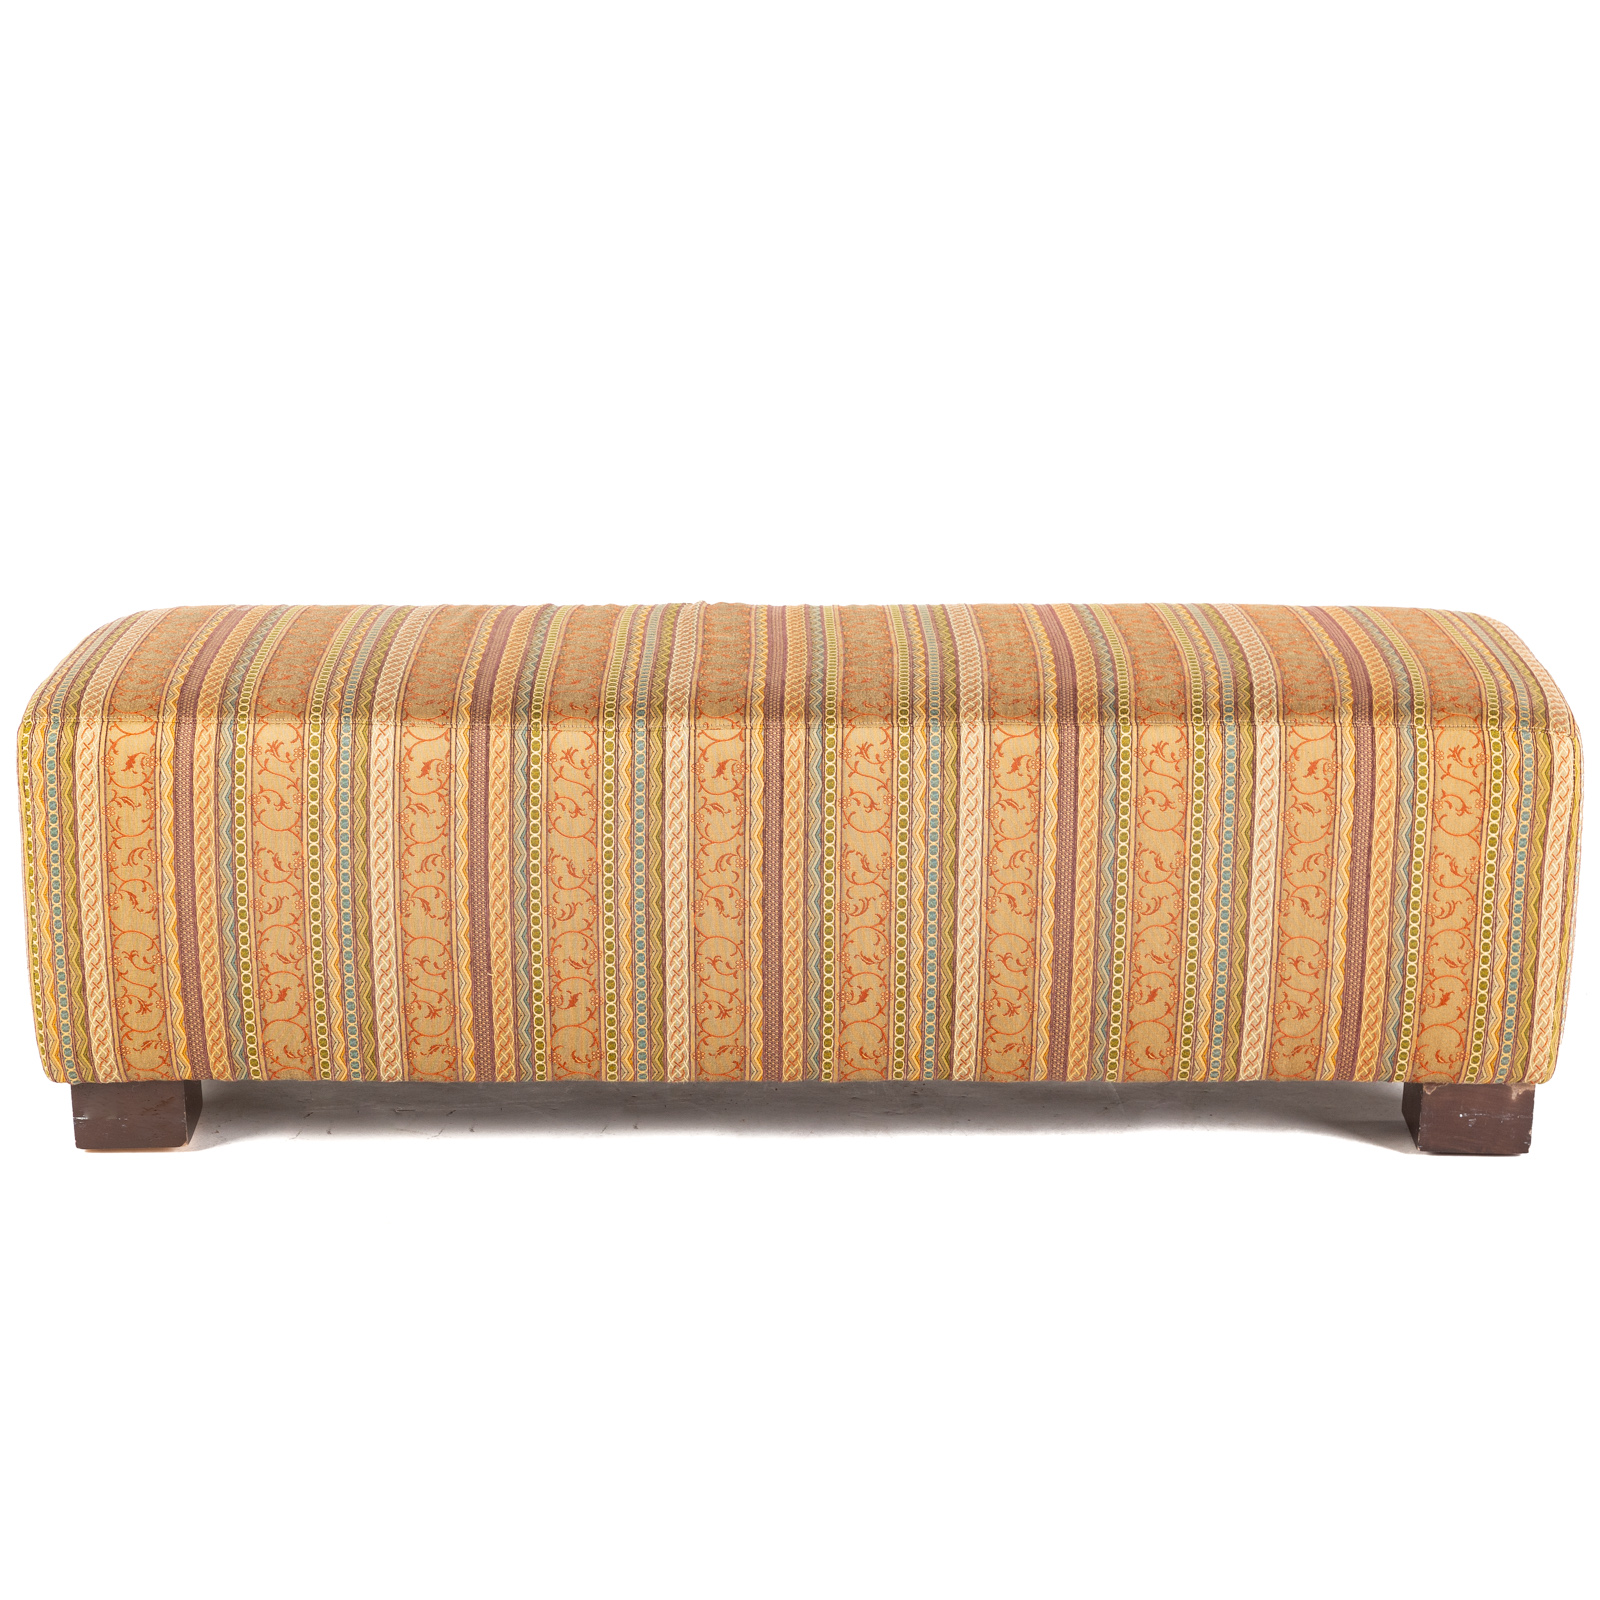 CONTEMPORARY UPHOLSTERED OTTOMAN/BENCH